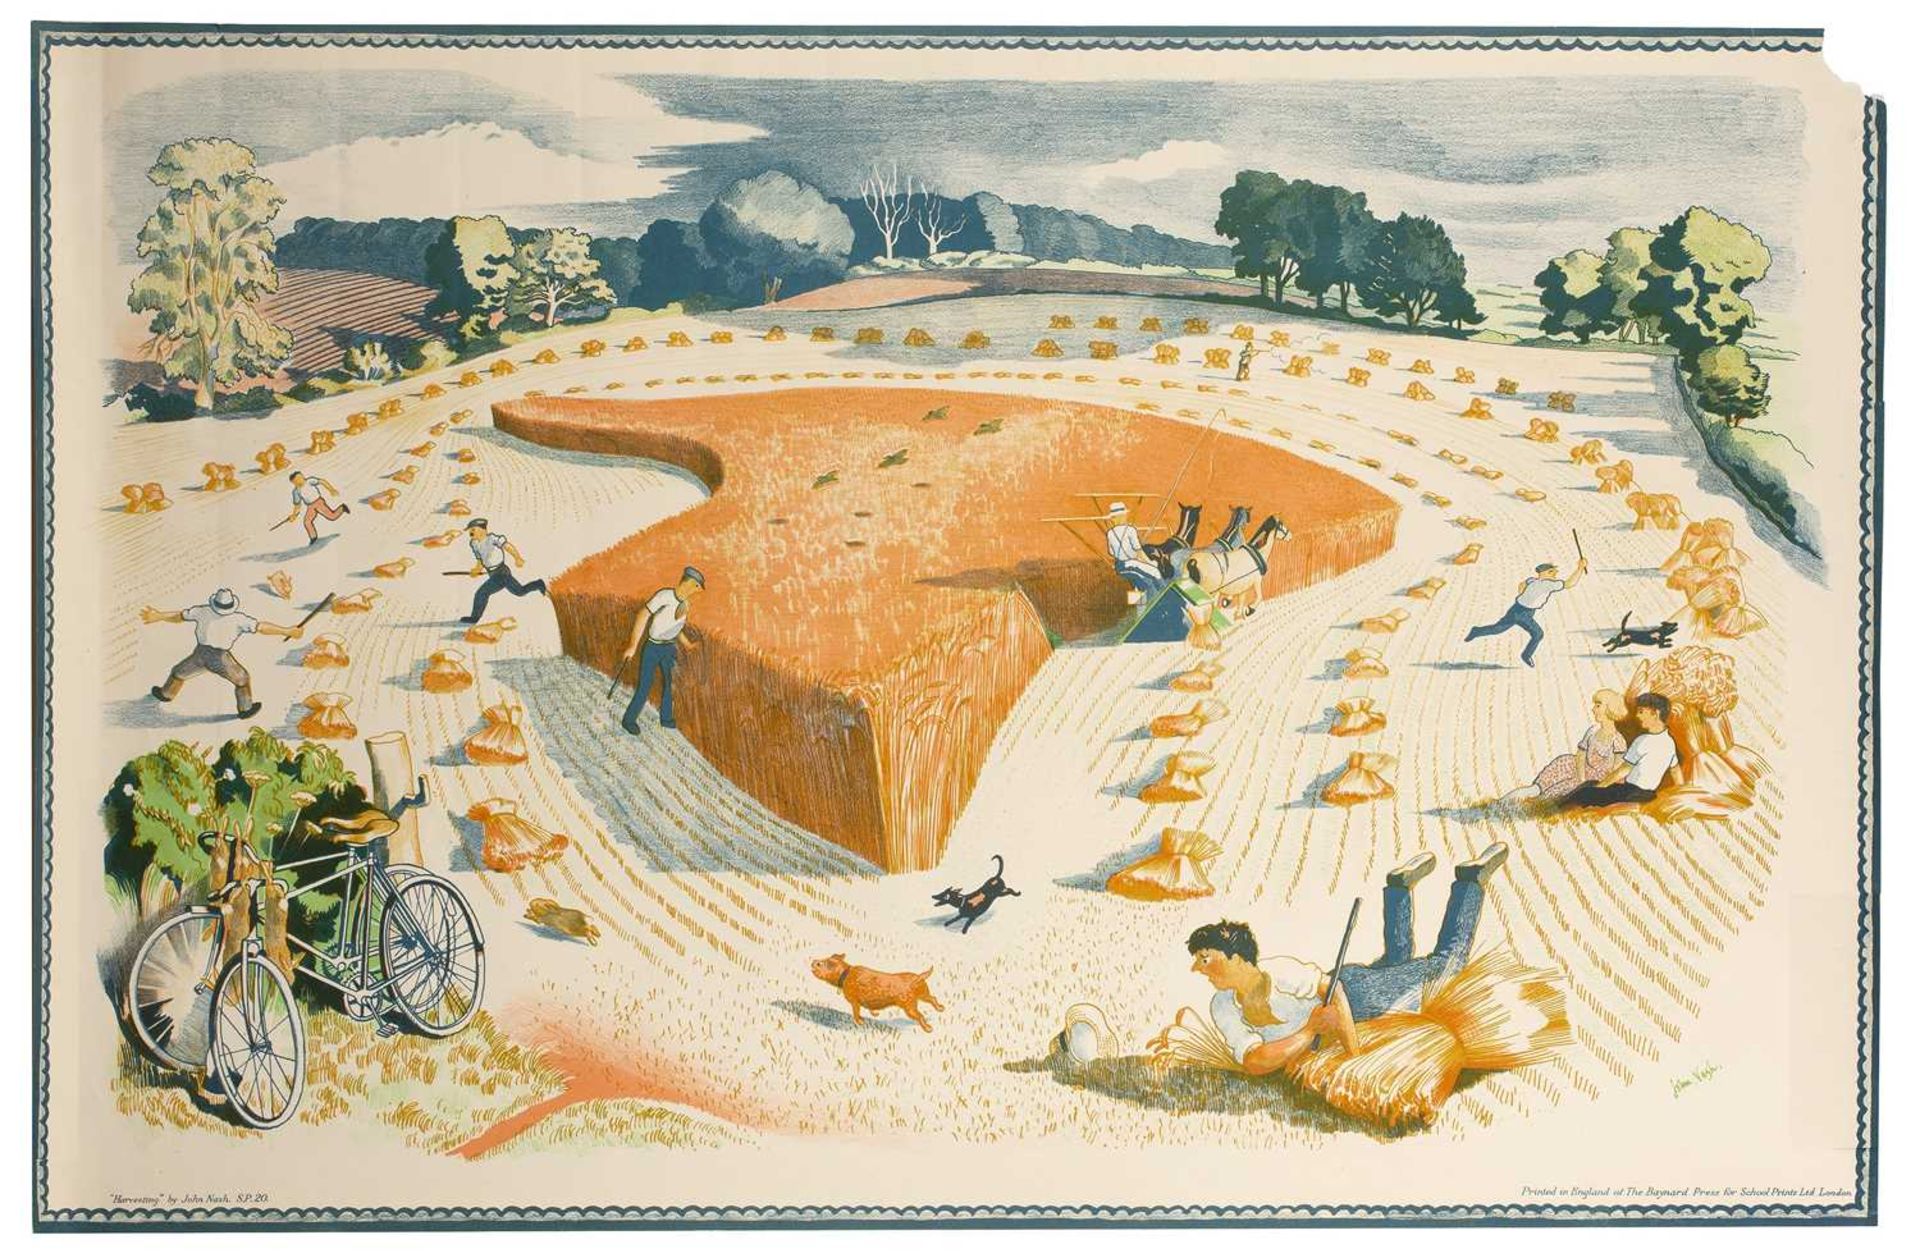 John Northcote Nash (1893-1977) Harvesting from the School Prints series lithograph printed at the